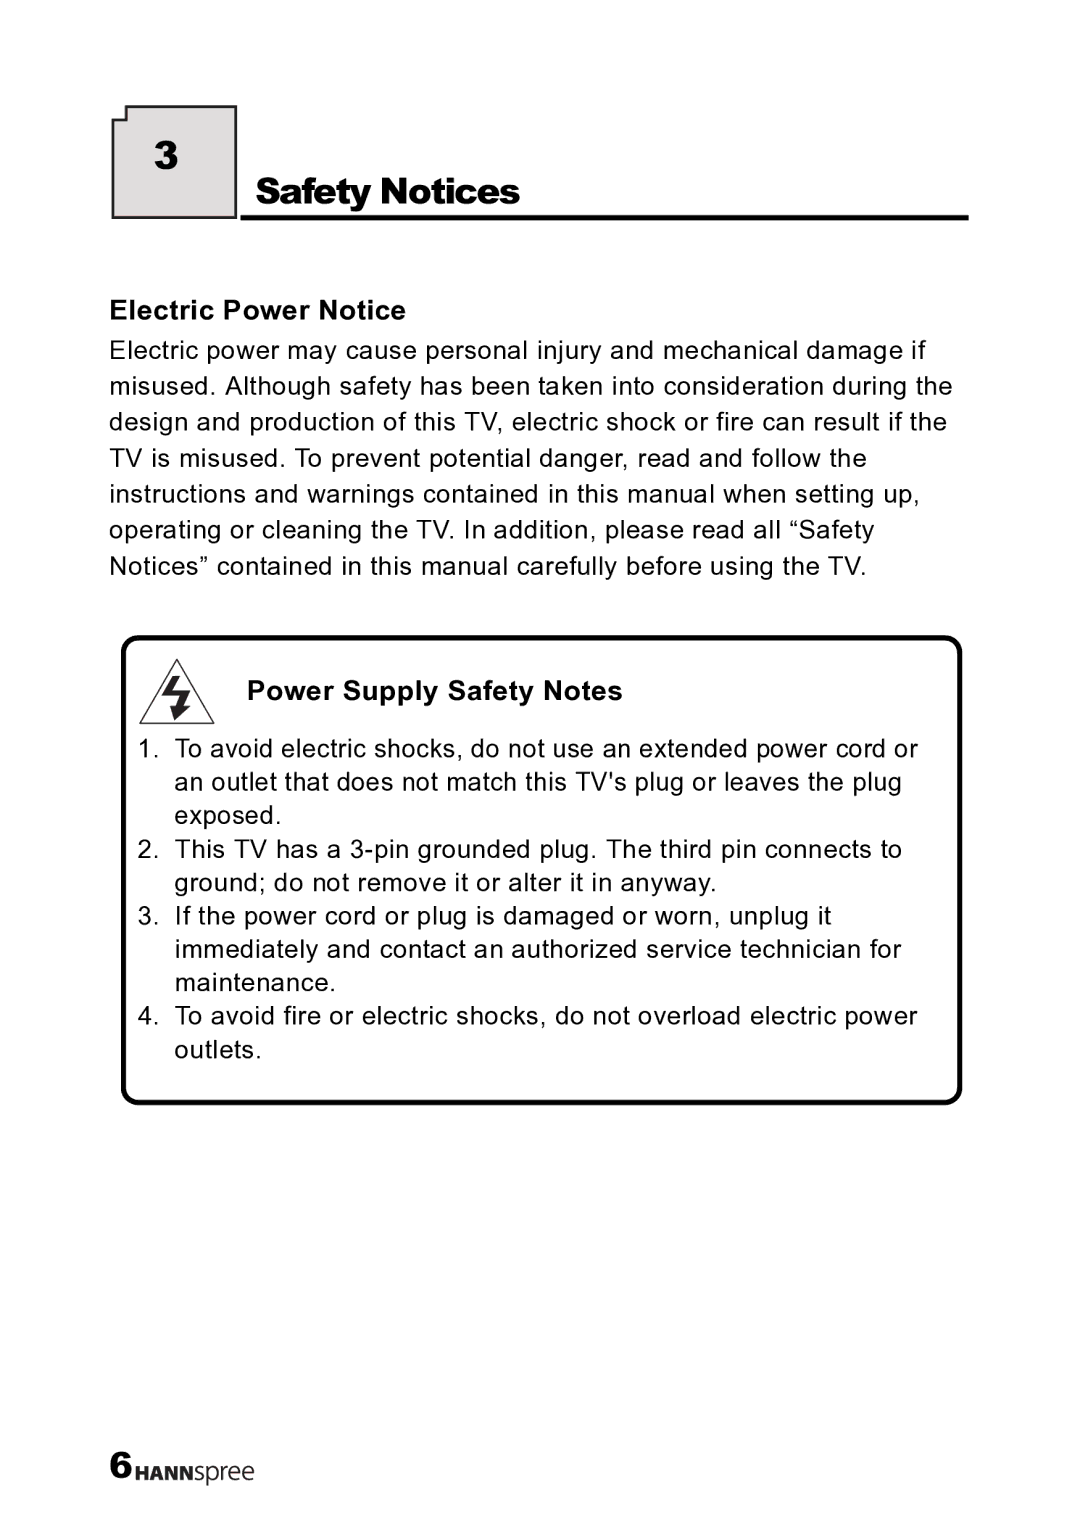 HANNspree LT12-23U1-000 user manual Electric Power Notice, Power Supply Safety Notes 